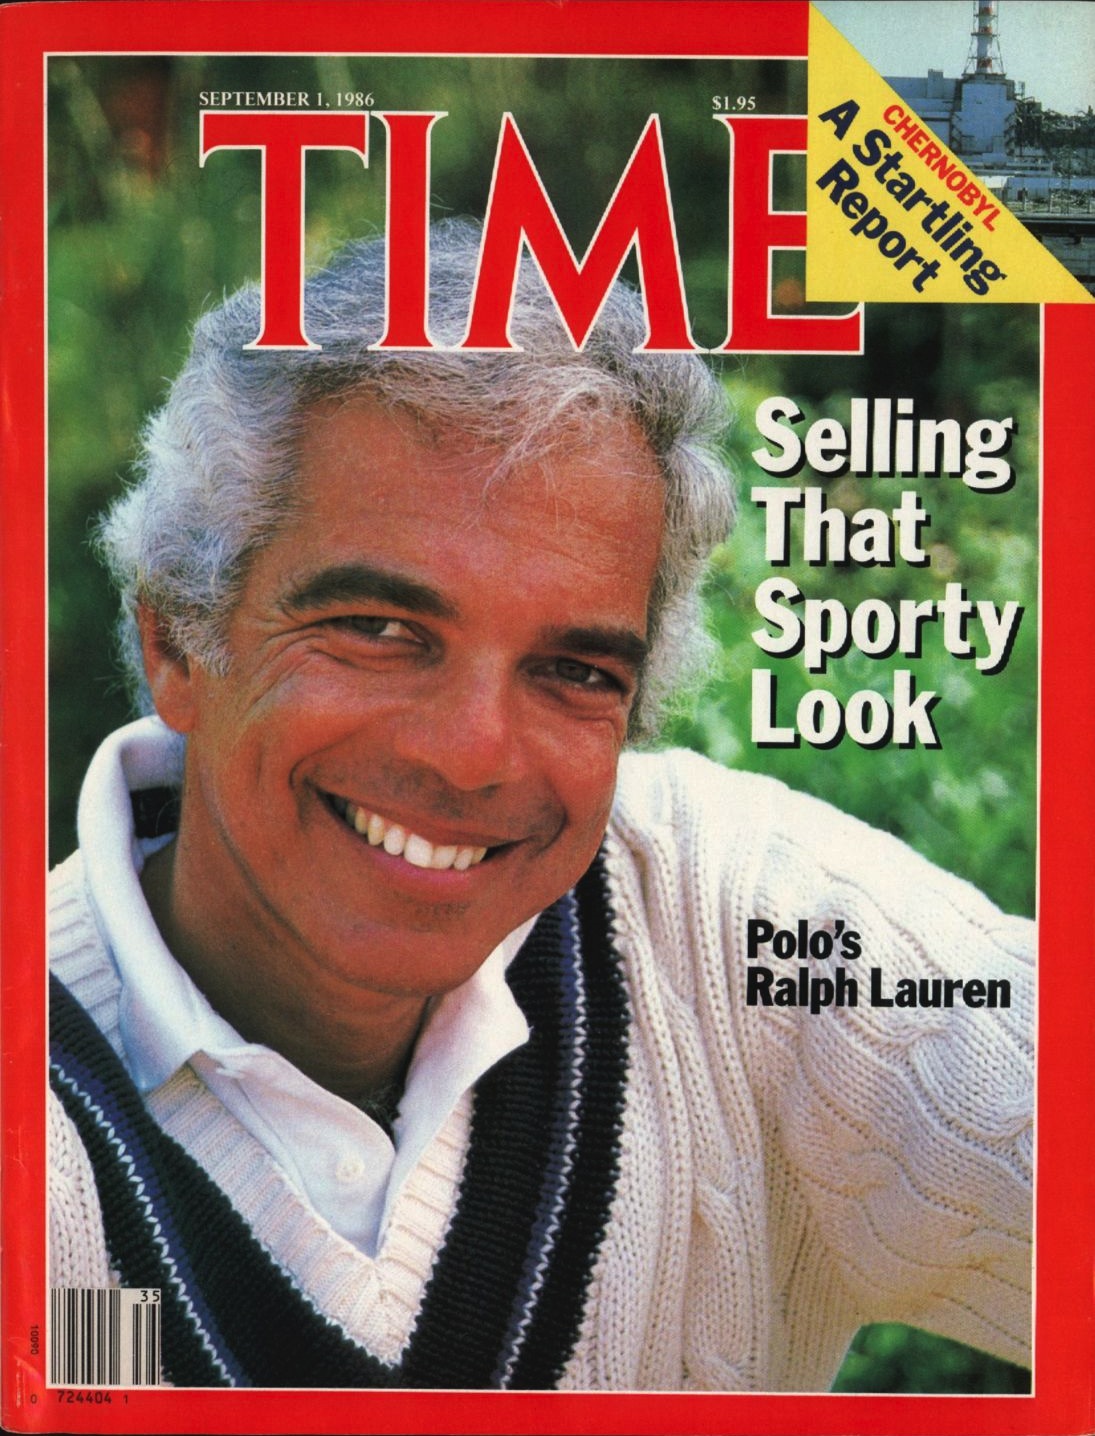 Sept. 1, 1986 cover of TIME